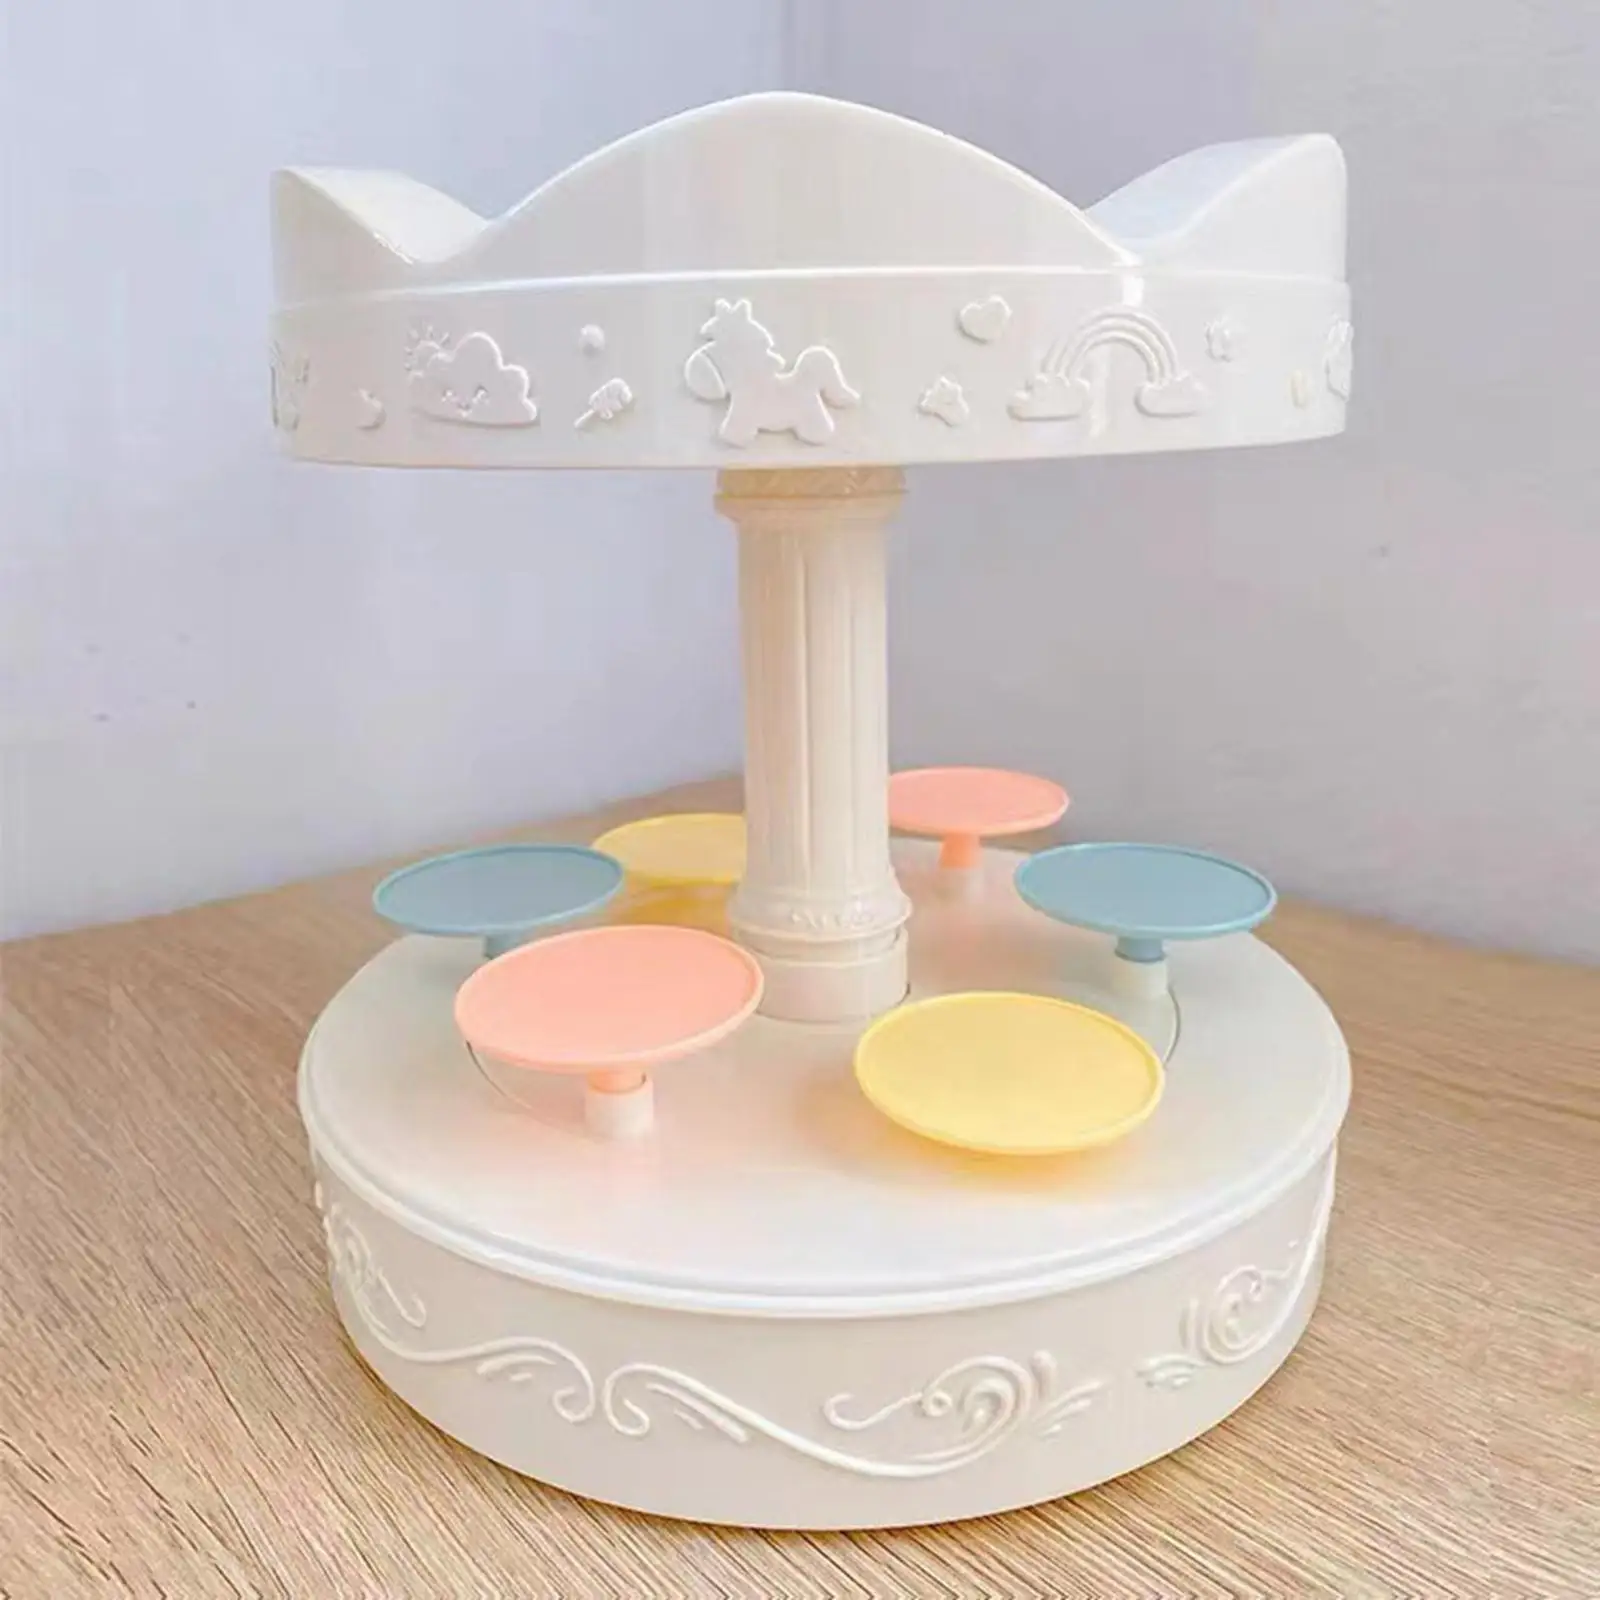 Electric Turntable Cupcake Display Stand Battery Operated Automatic Rotating Carousel Cupcake Holder